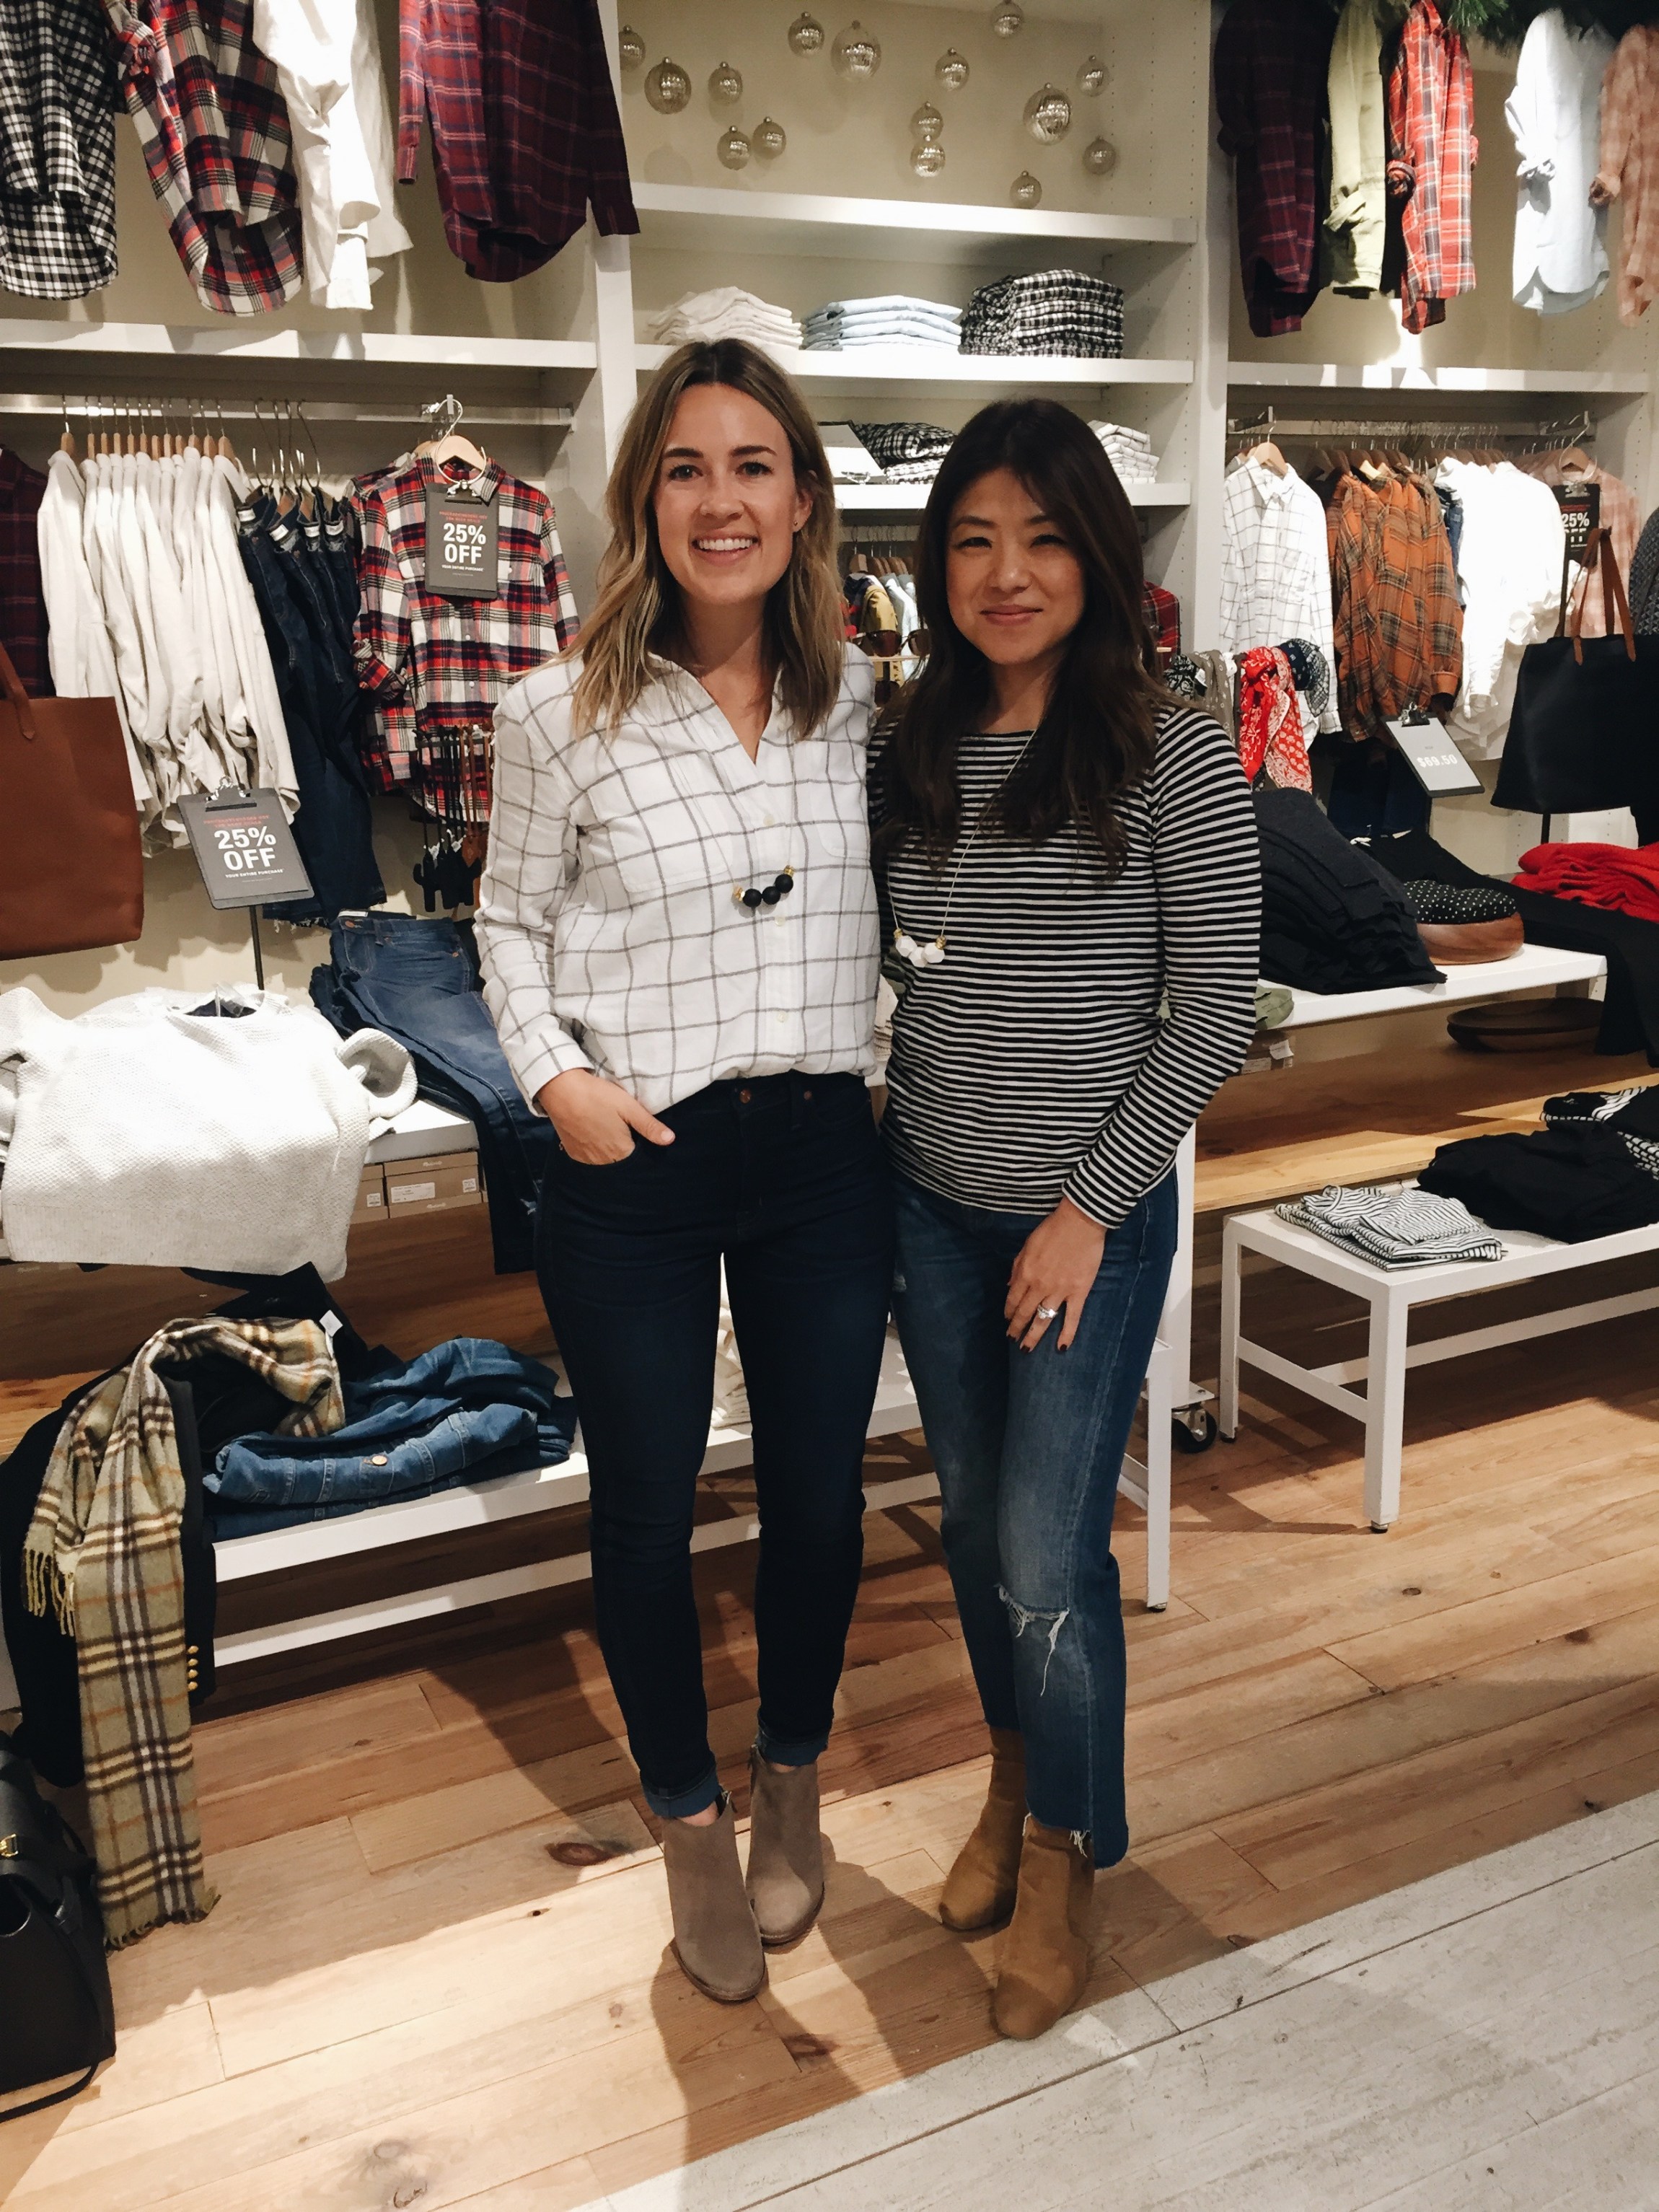 Save the Date: Madewell + Natalie Borton Pop-Up Shop on 3/24